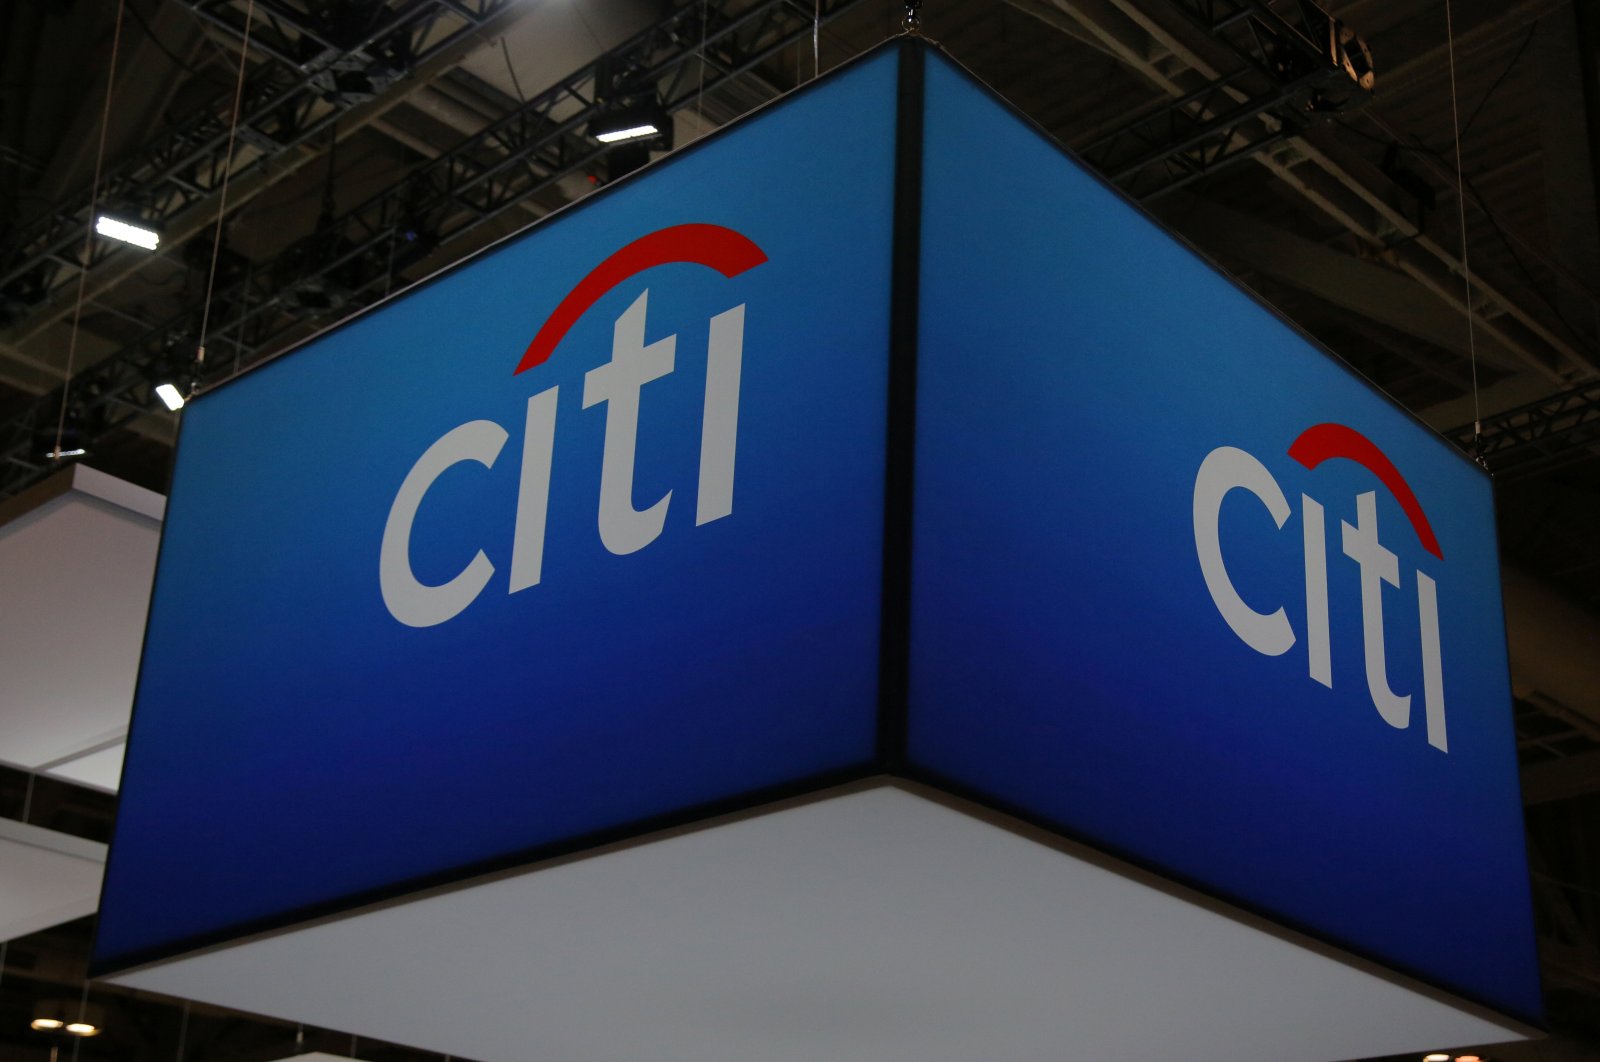 The Citigroup Inc. (Citi) logo is seen at the SIBOS banking and financial conference in Toronto, Ontario, Canada, Oct. 19, 2017. (Reuters Photo)